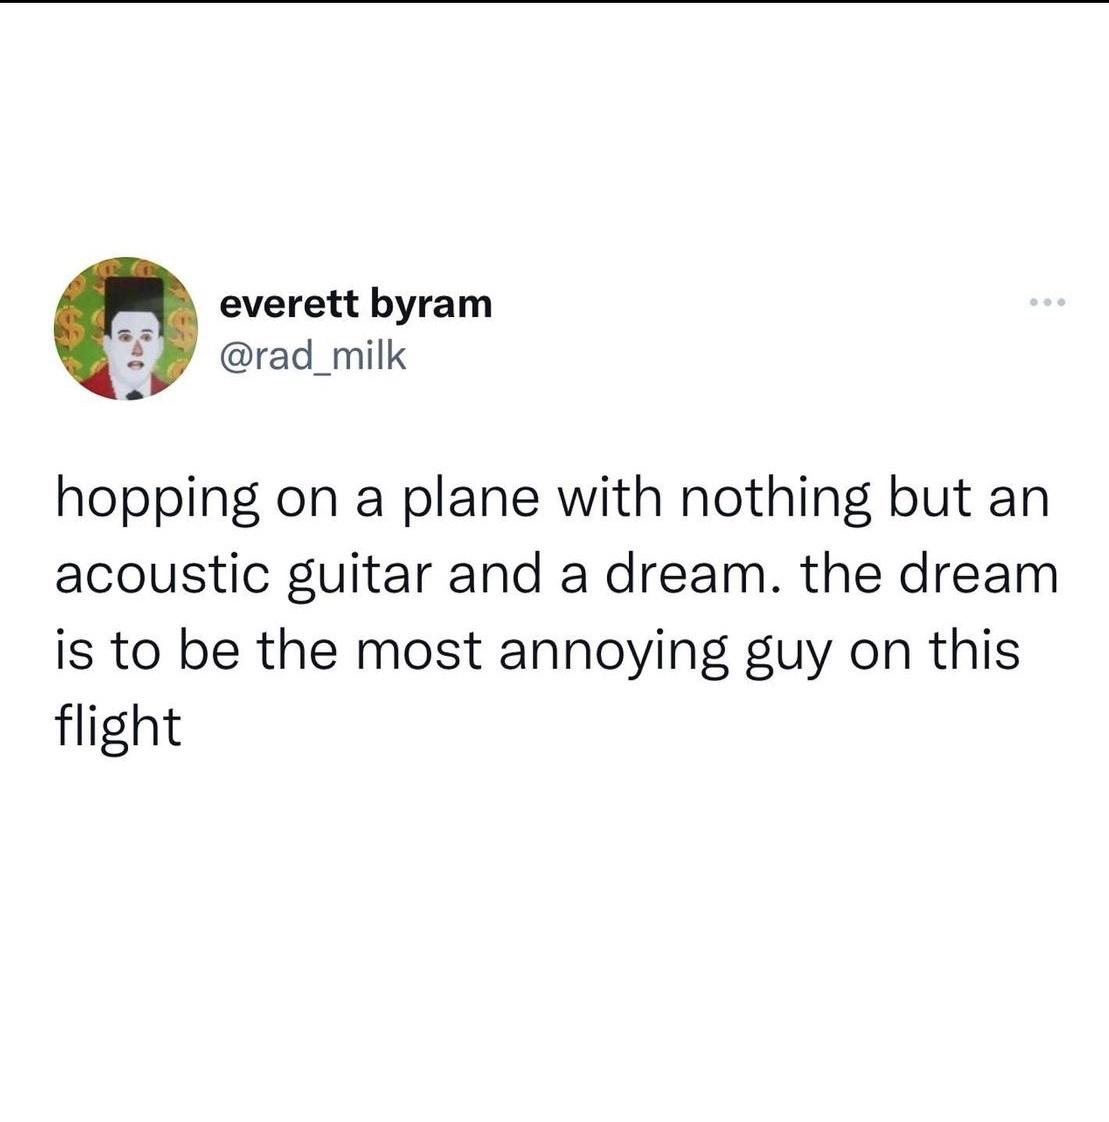 funny tweets - angle - everett byram hopping on a plane with nothing but an acoustic guitar and a dream. the dream is to be the most annoying guy on this flight